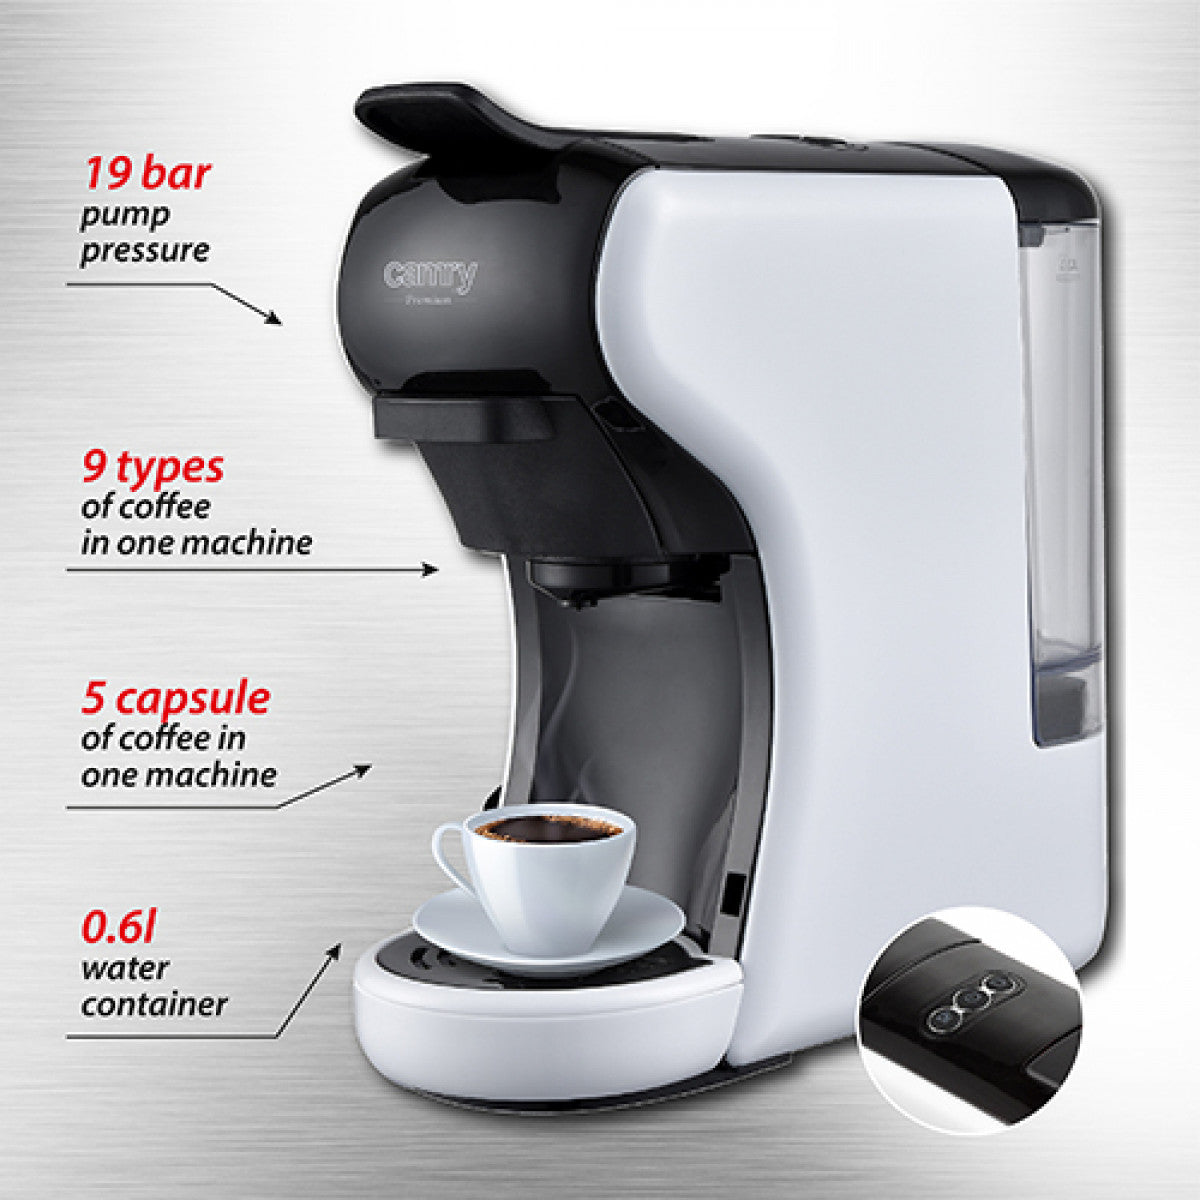 Camry espresso machine with several different capsules 